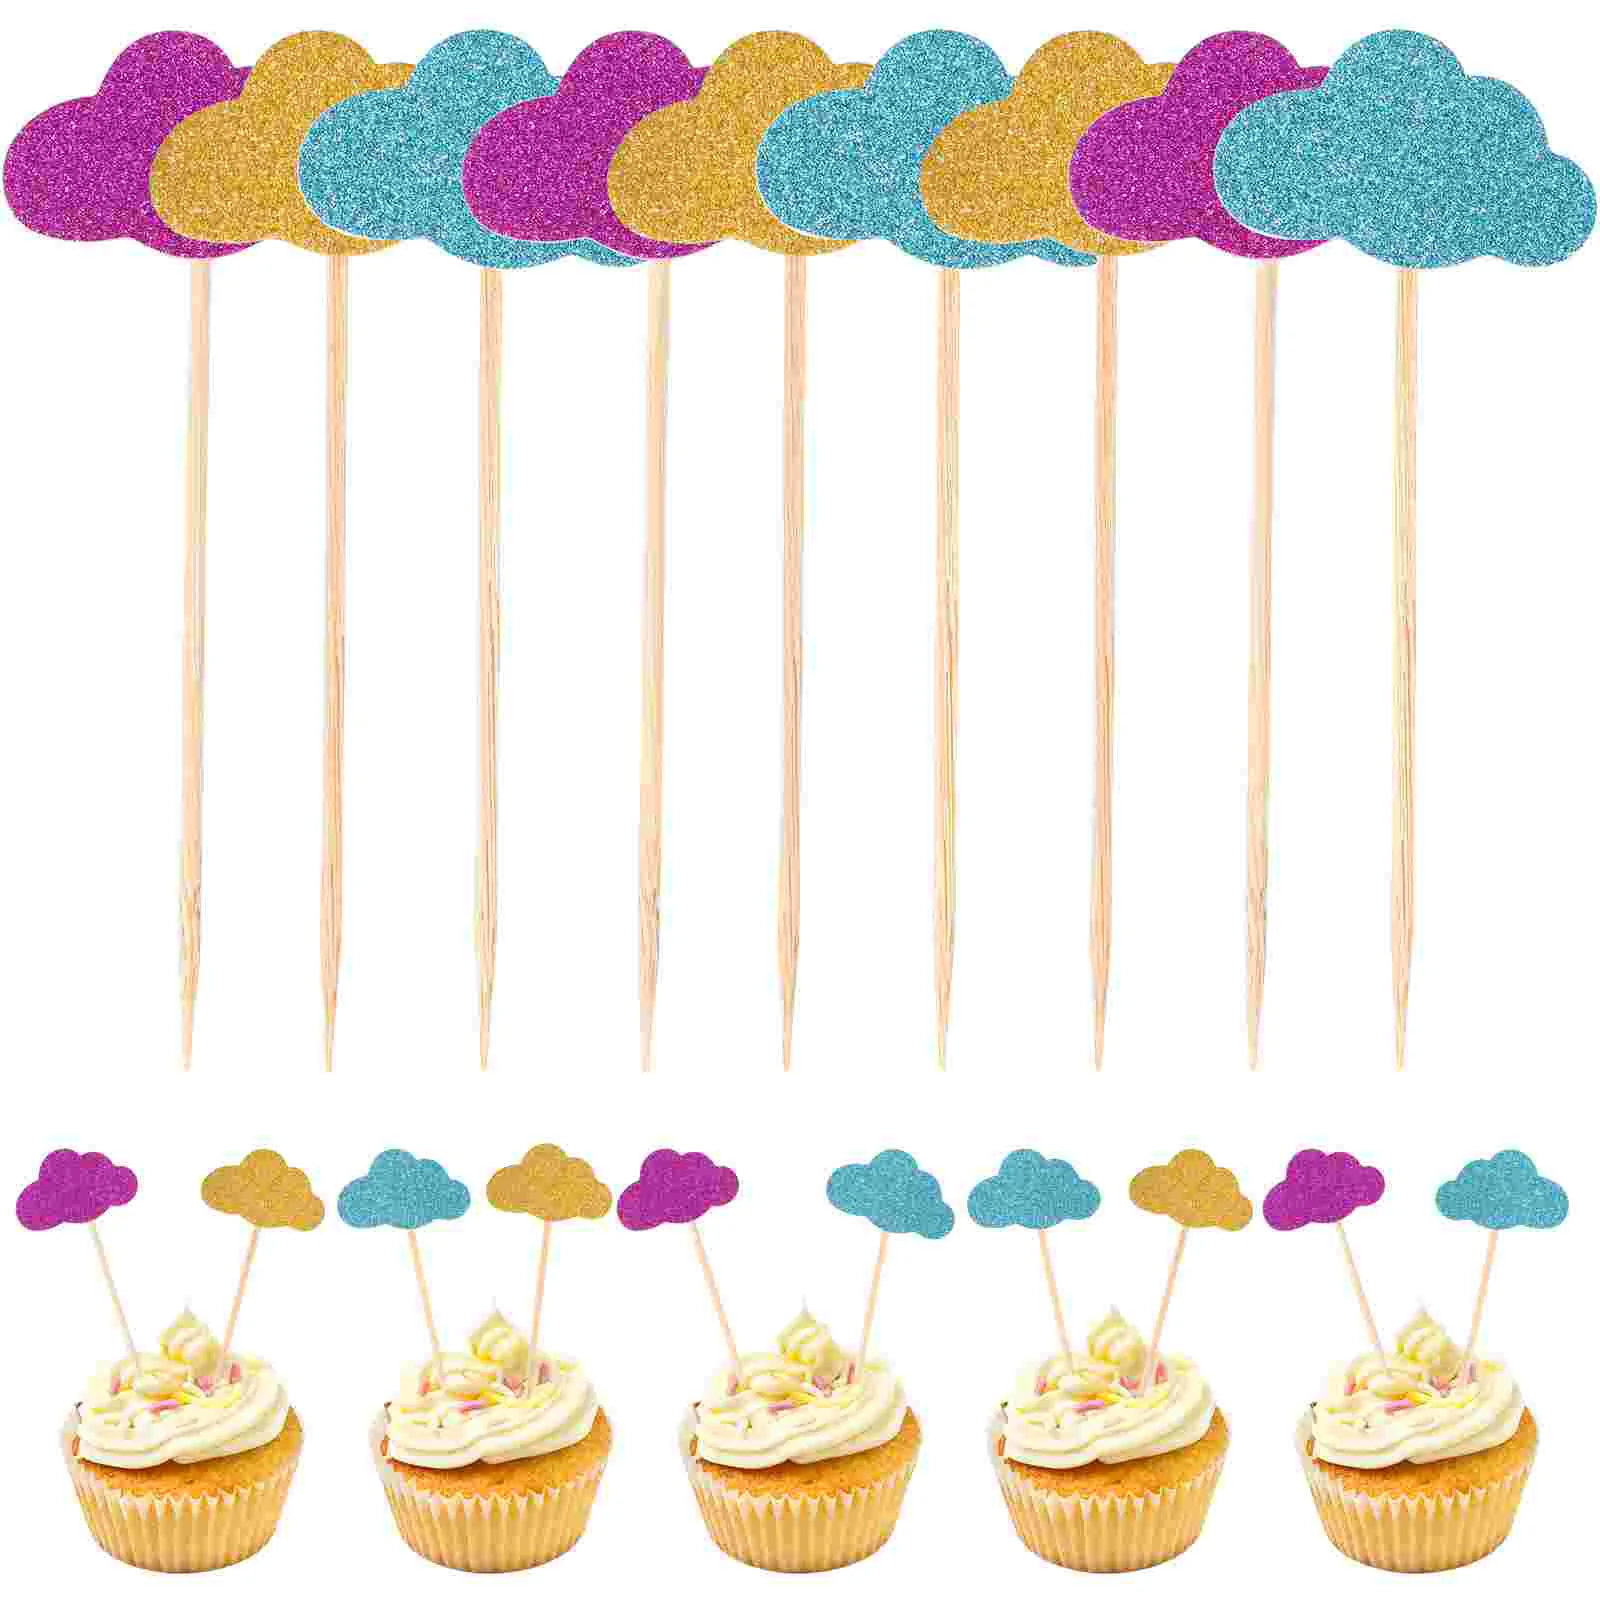 

20PCS Clouds Cake Toppers Decorative Glittering Cupcake Muffin Food Fruit Picks Baby Shower Birthday Party Favors Supplies